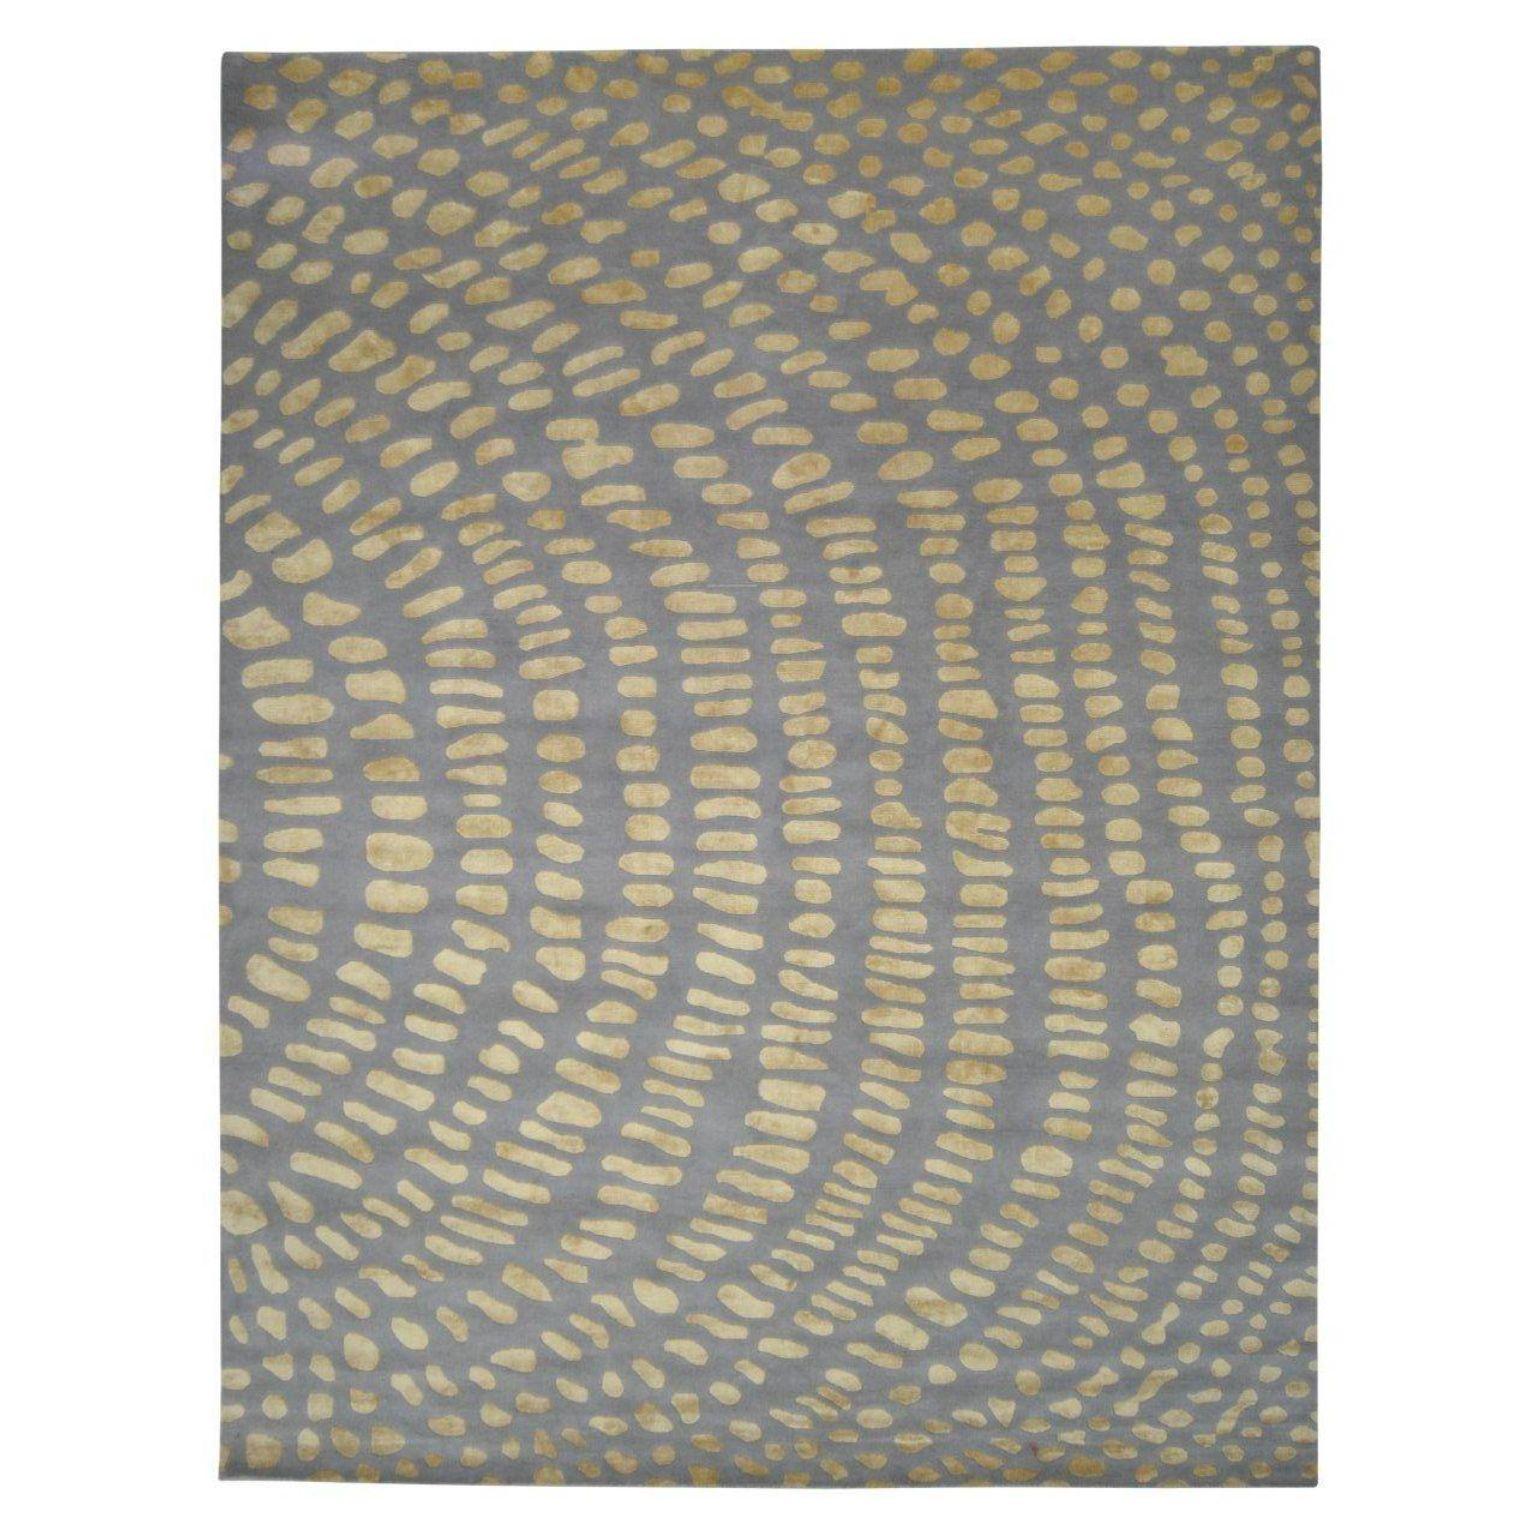 Aboriginal scales small Rug by Art & Loom
Dimensions: D243.4 x H304.8 cm
Materials: New Zealand wool with, Chinese silk—single pile height
Also available in different dimensions.

Samantha Gallacher has always had a keen eye for aesthetics,